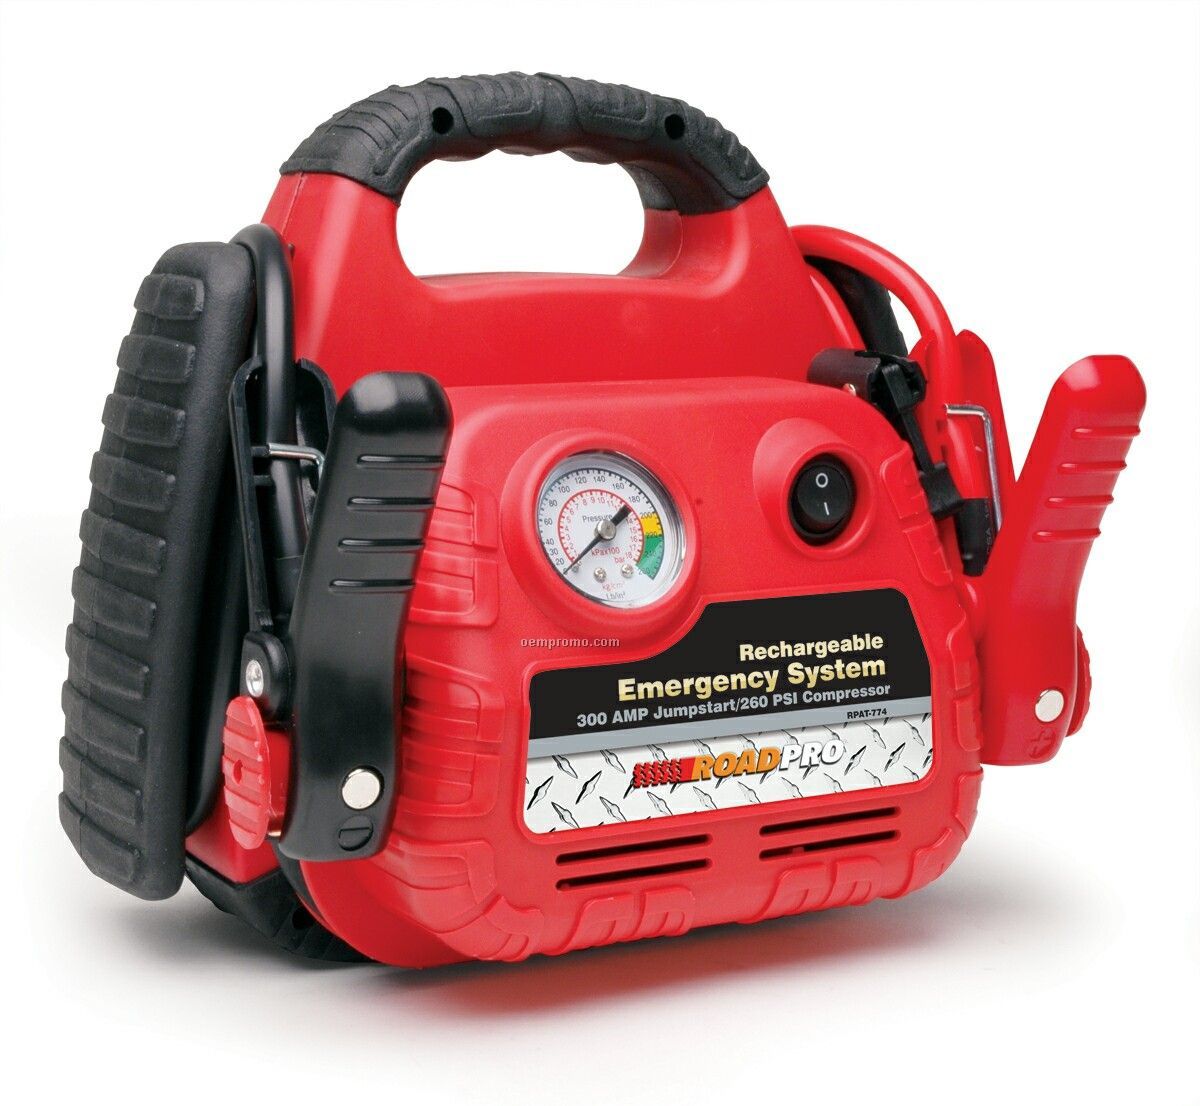 Rechargeable Emergency System With 12-volt Power Port And Air Compressor